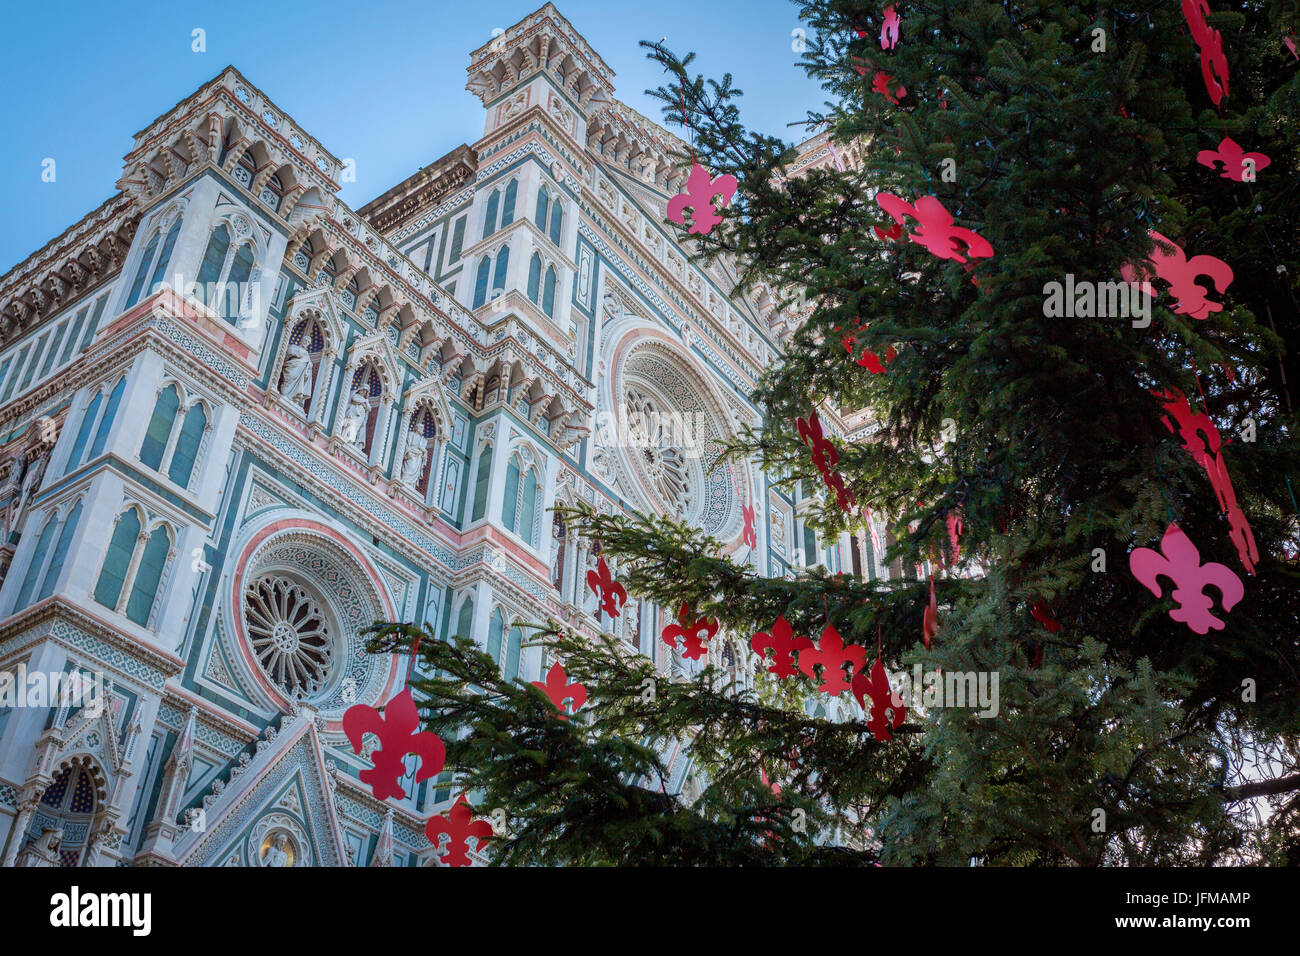 Florence, Tuscany, Italy, The front of the famous Giglio Fiorentino symbol Stock Photo